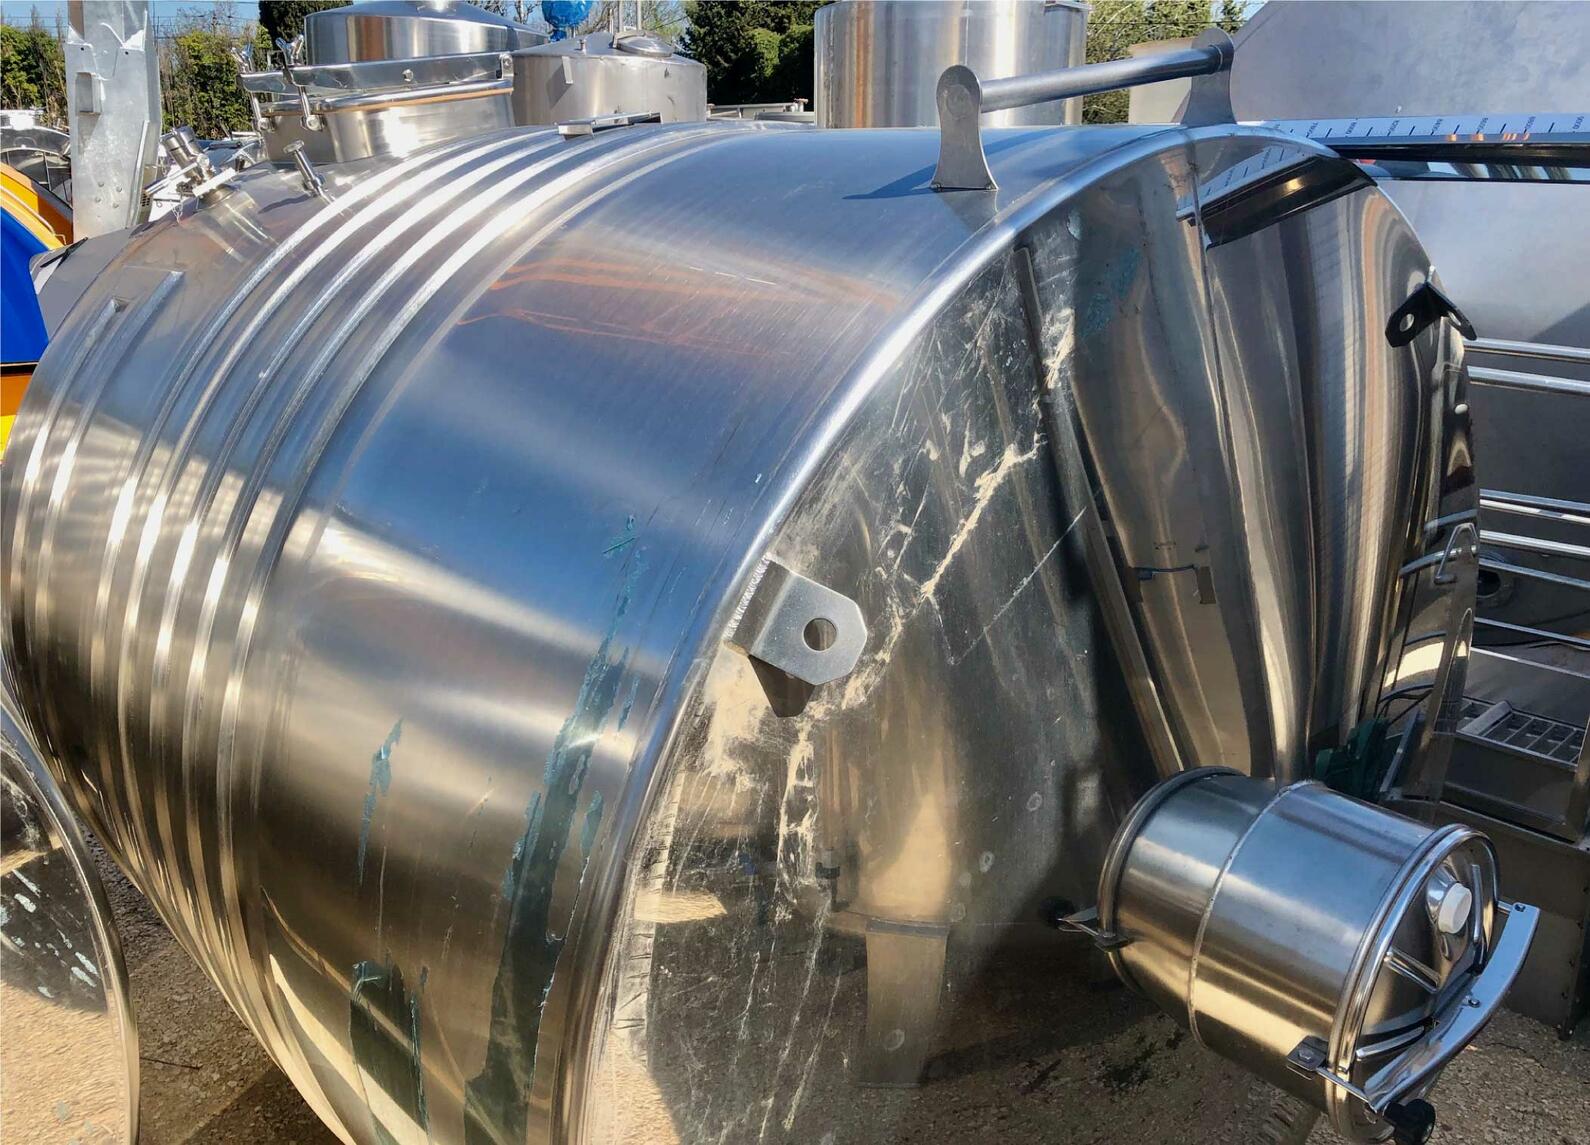 304 stainless steel tank - Closed - STOIPSER7500B